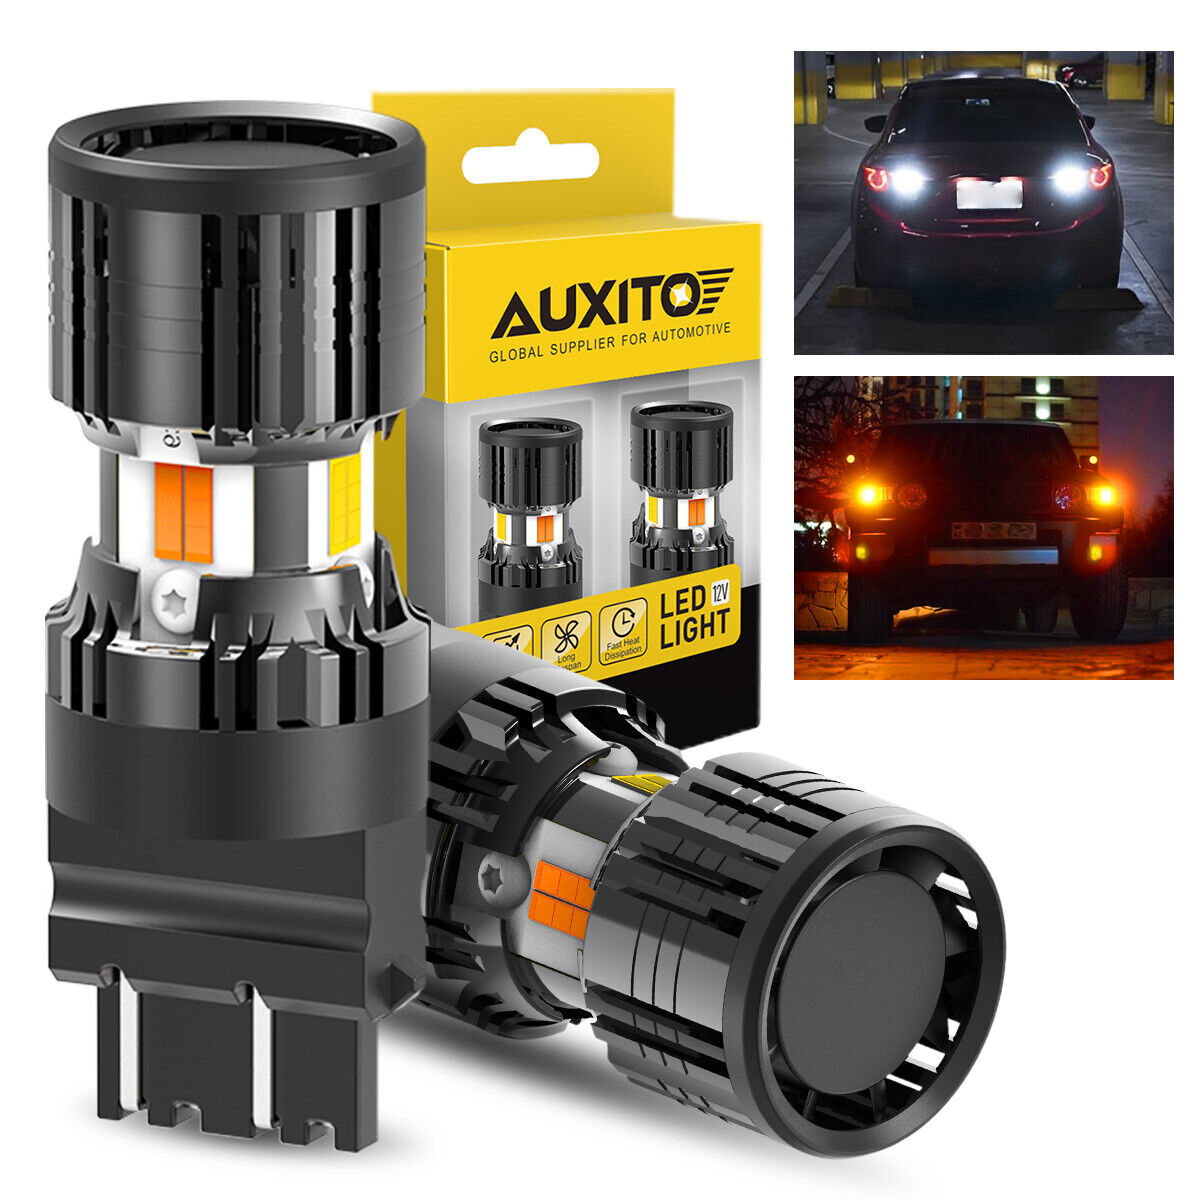 AUXITO 3157 LED Turn Signal Light Switchback Amber/White For Ford F150 1990-2014